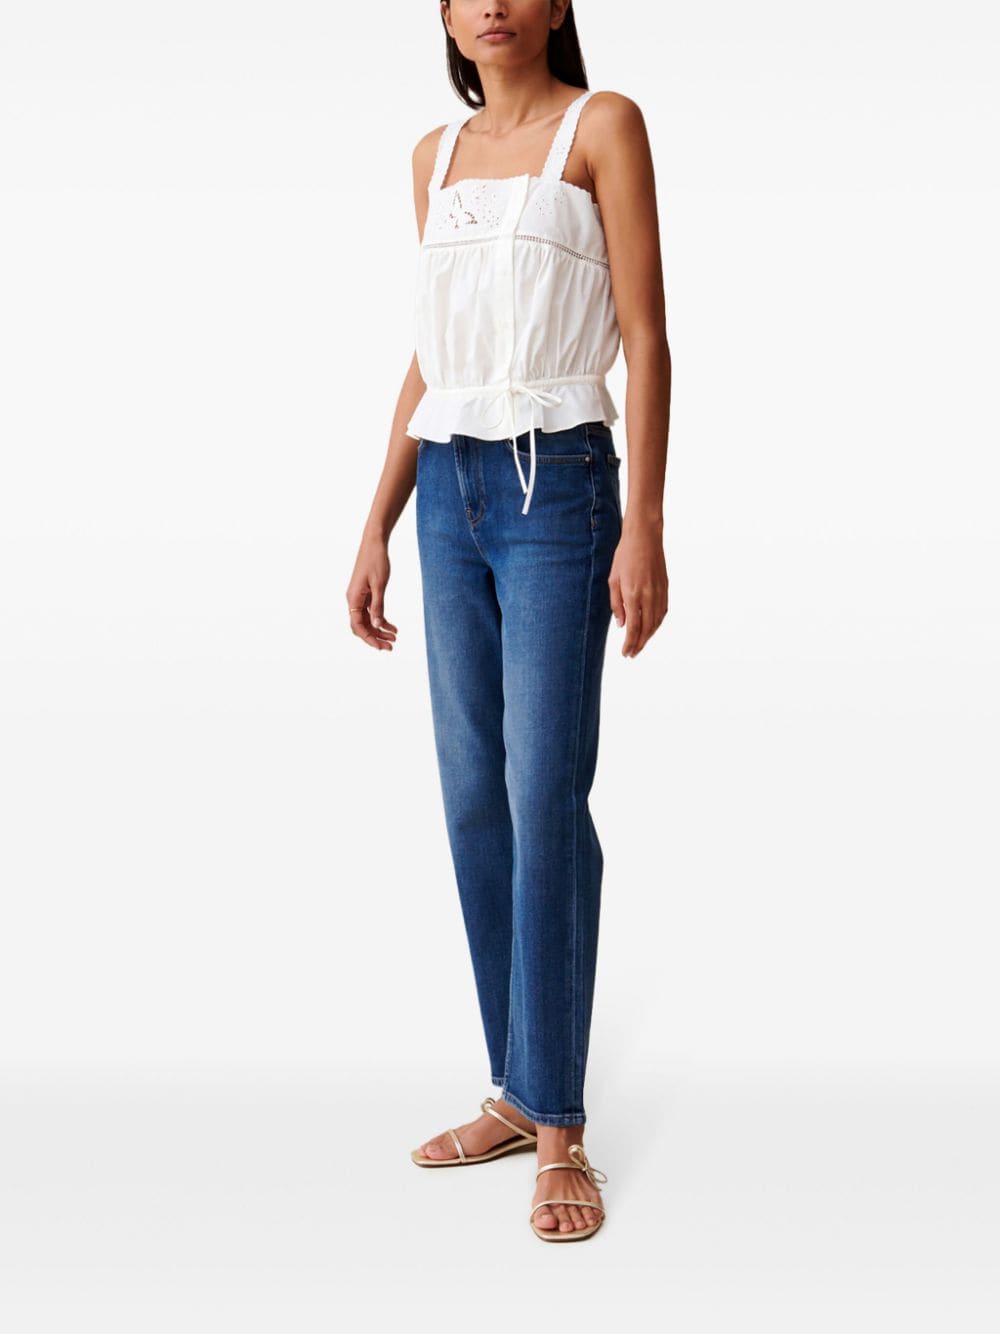 Claudie Pierlot broderie anglaise top - Wit